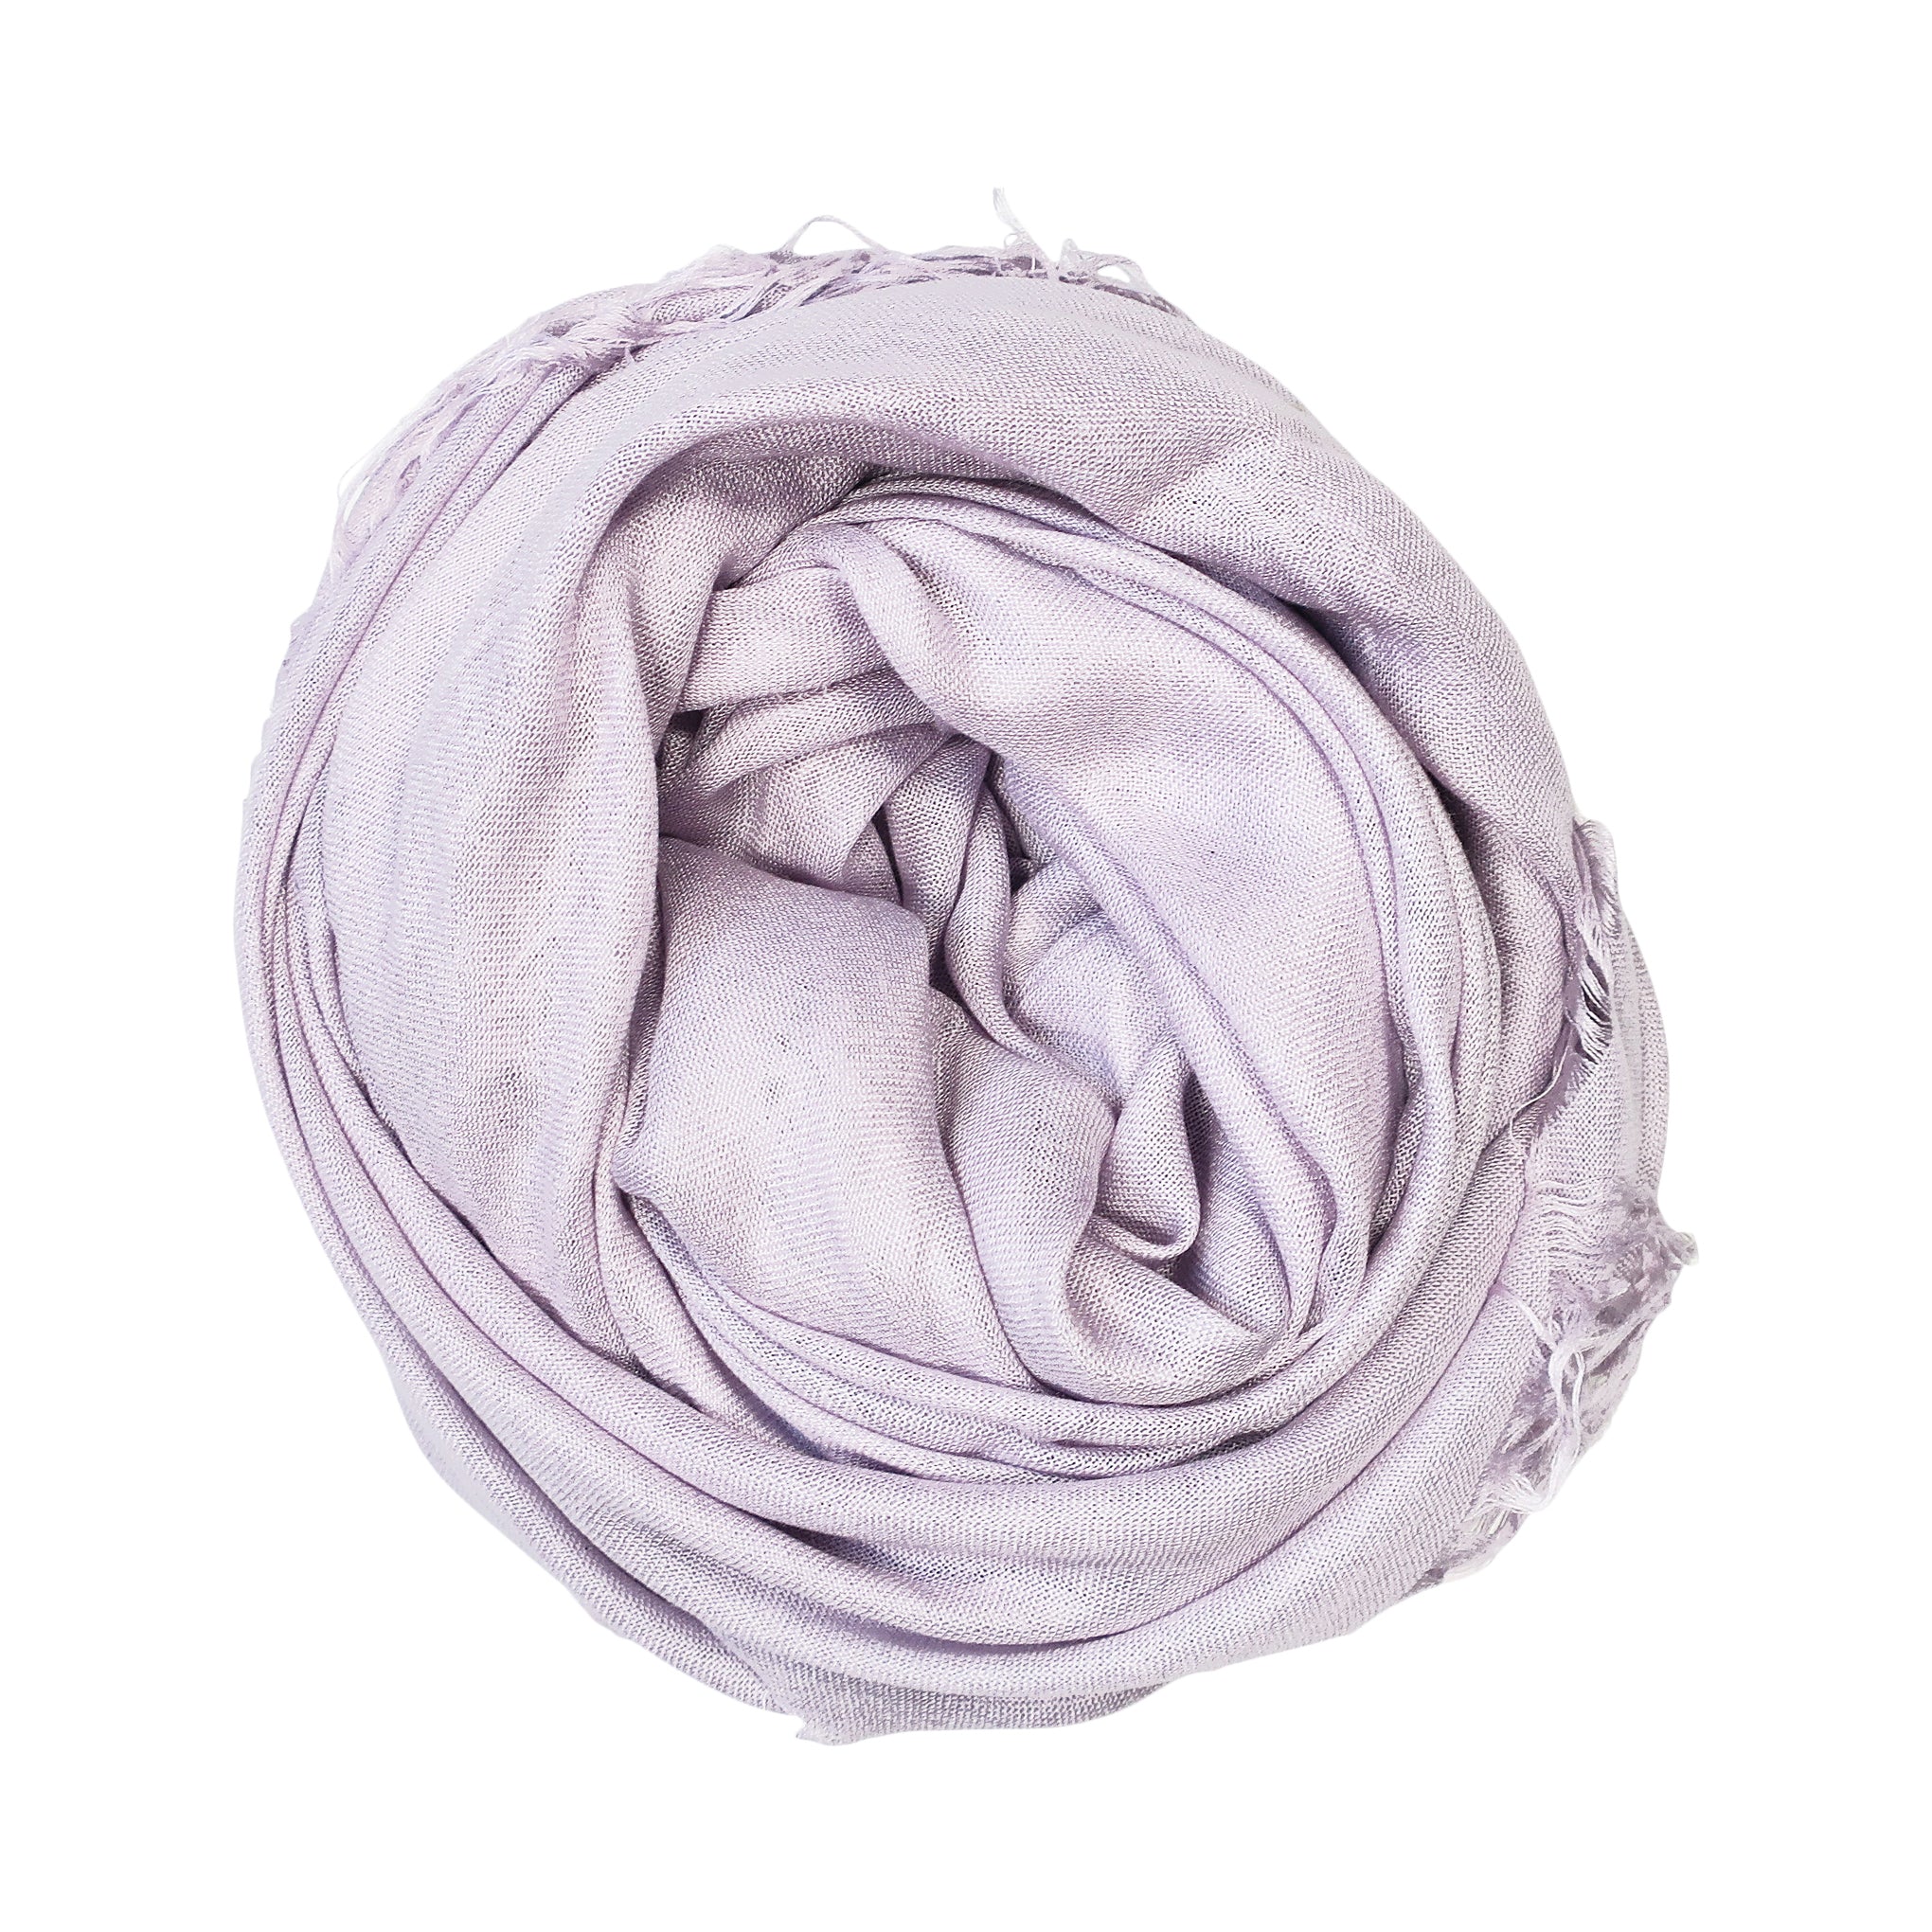 Blue Pacific Tissue Solid Modal and Cashmere Scarf Shawl in Lilac Purple